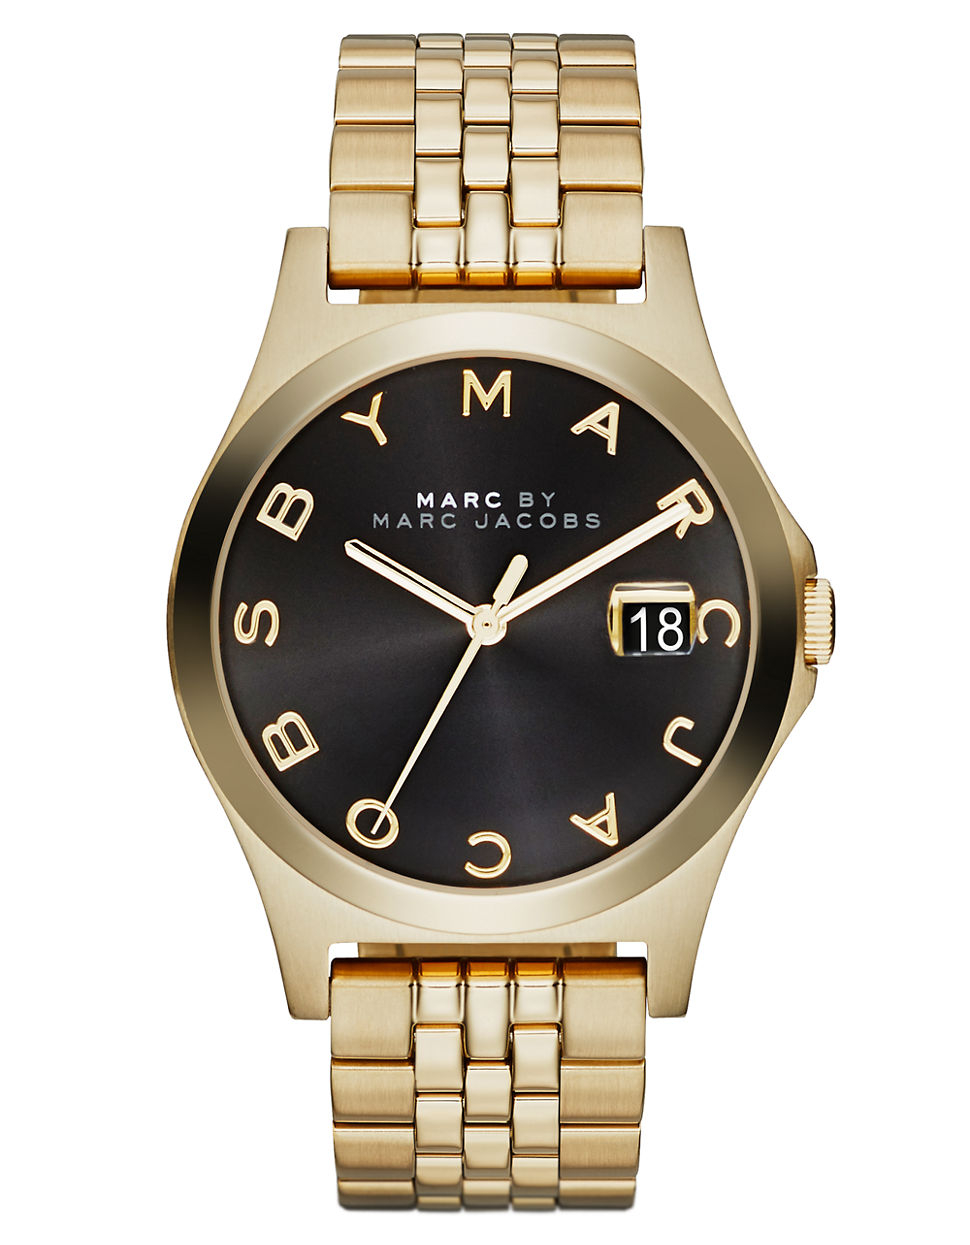 Marc by marc jacobs Mens The Slim Stainless Steel Bracelet Watch in ...